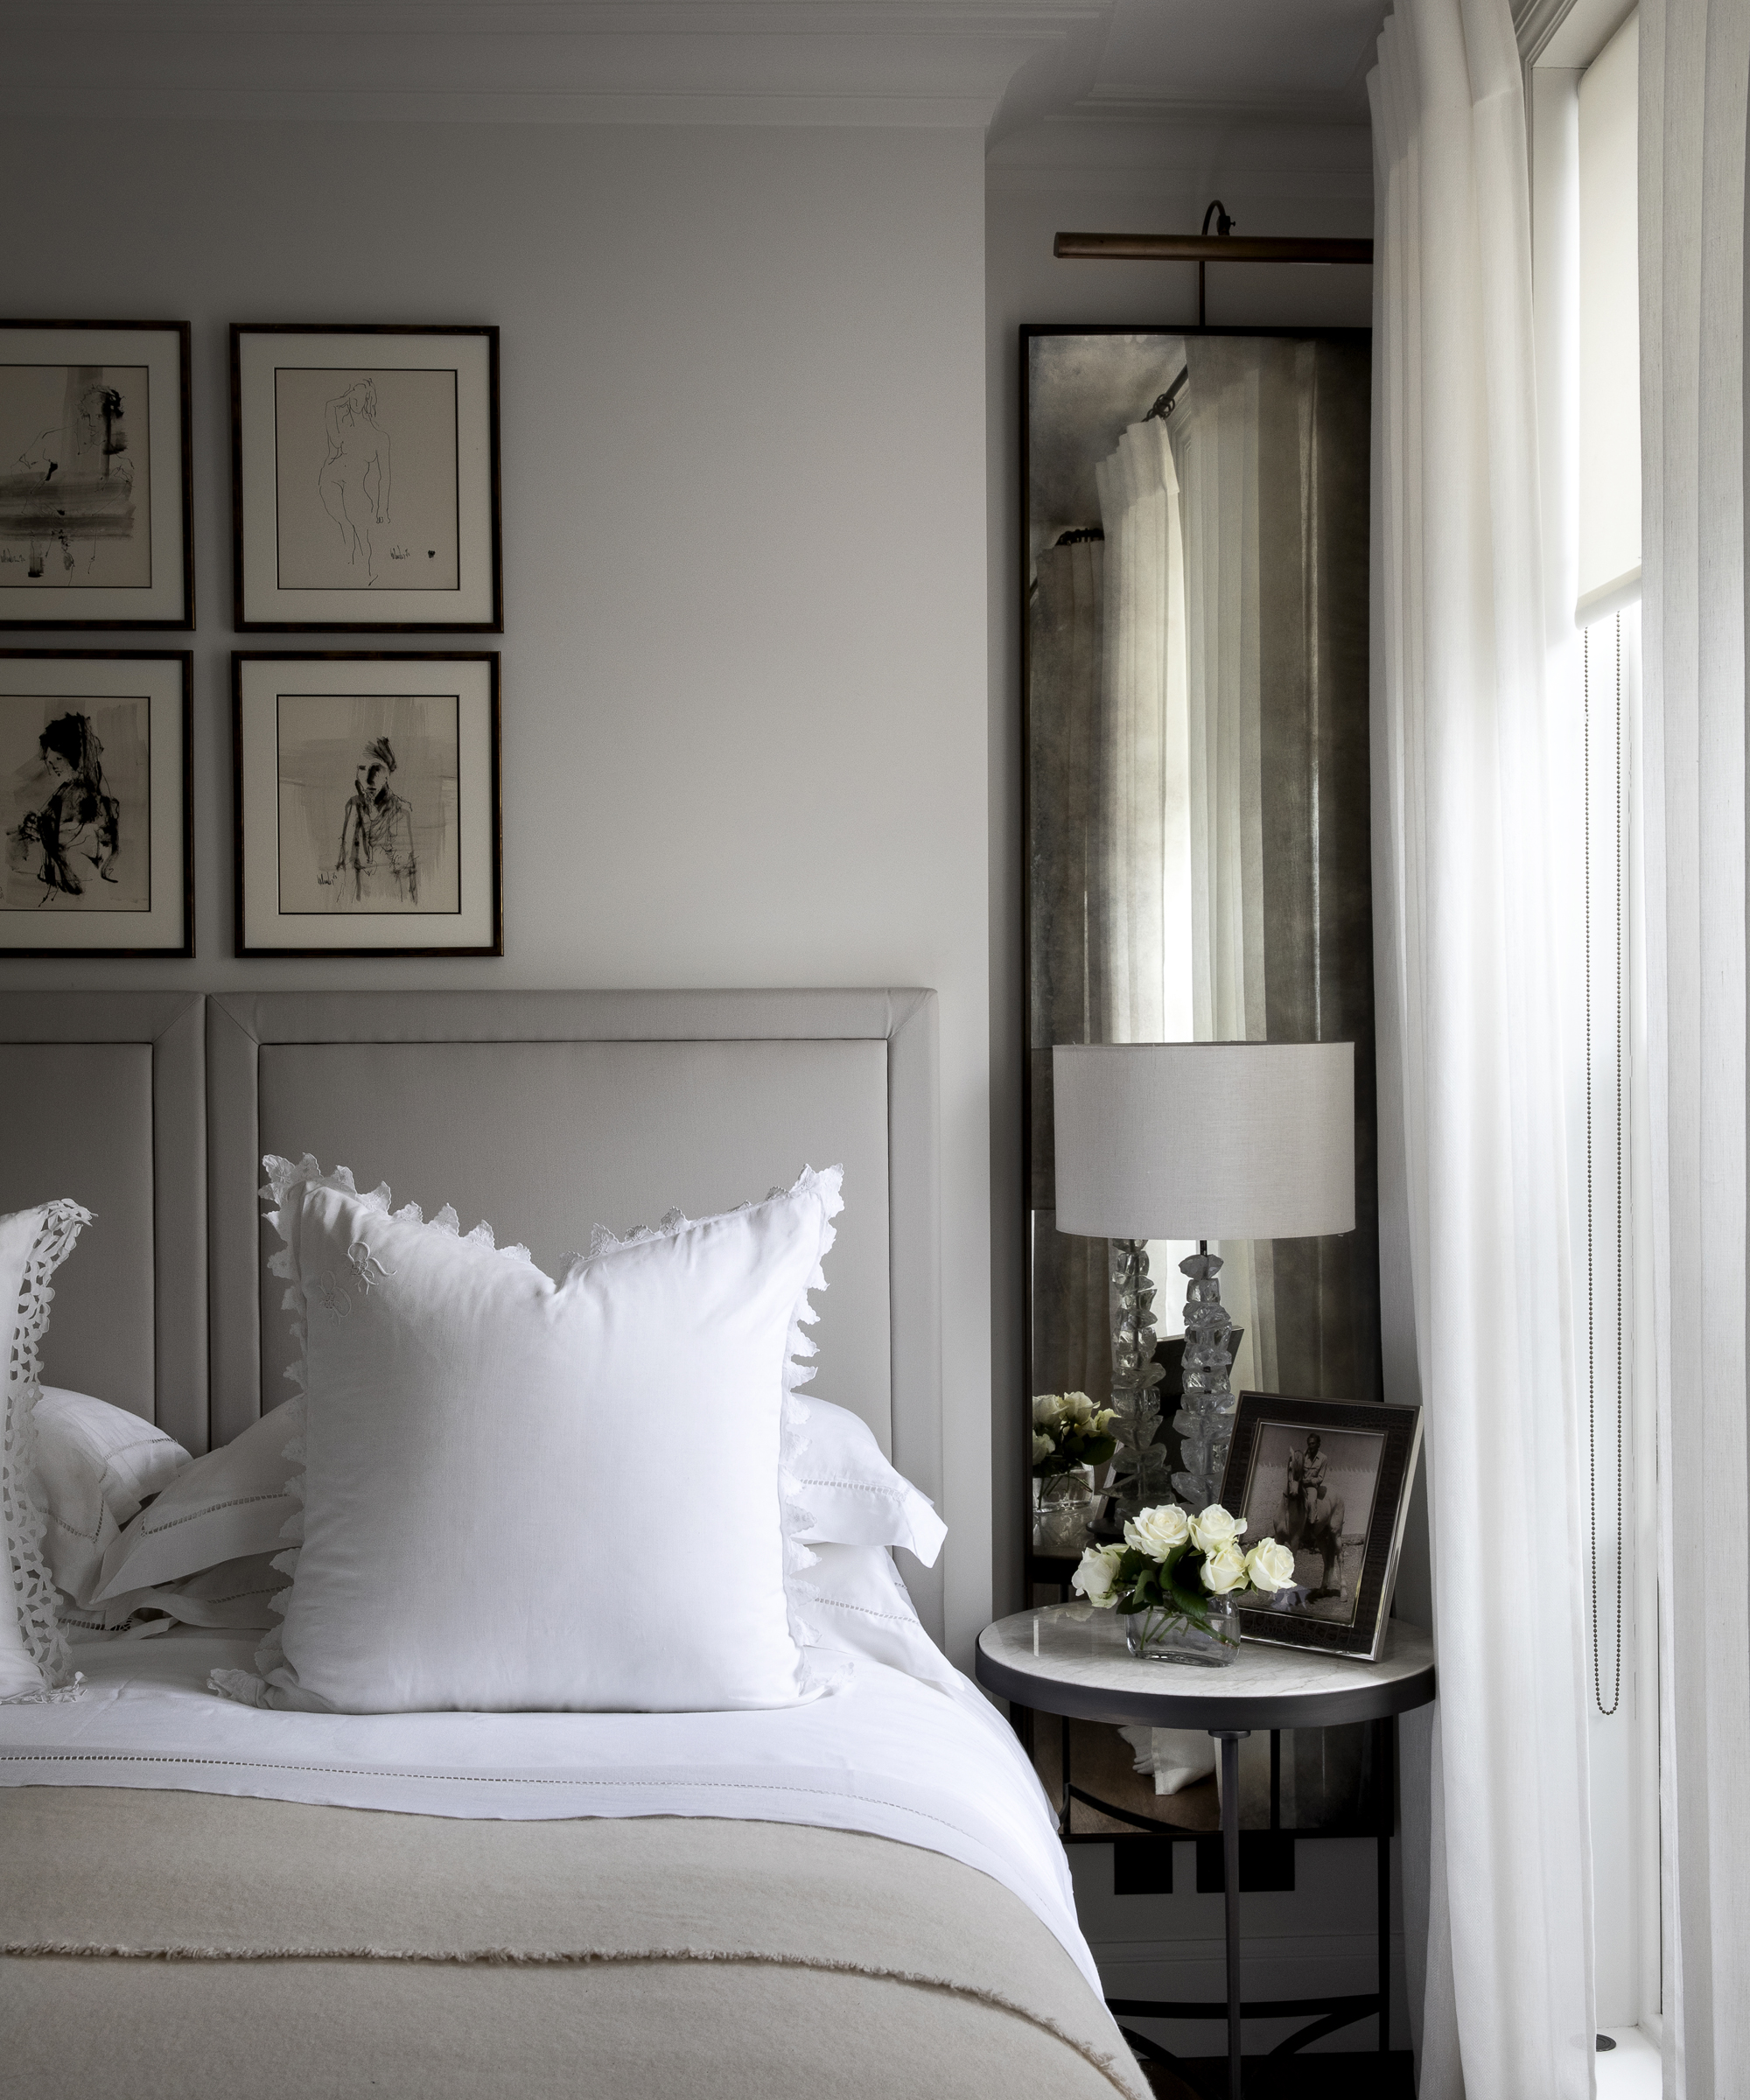 A white bedroom idea with pale grey headboard and tarnished mirror